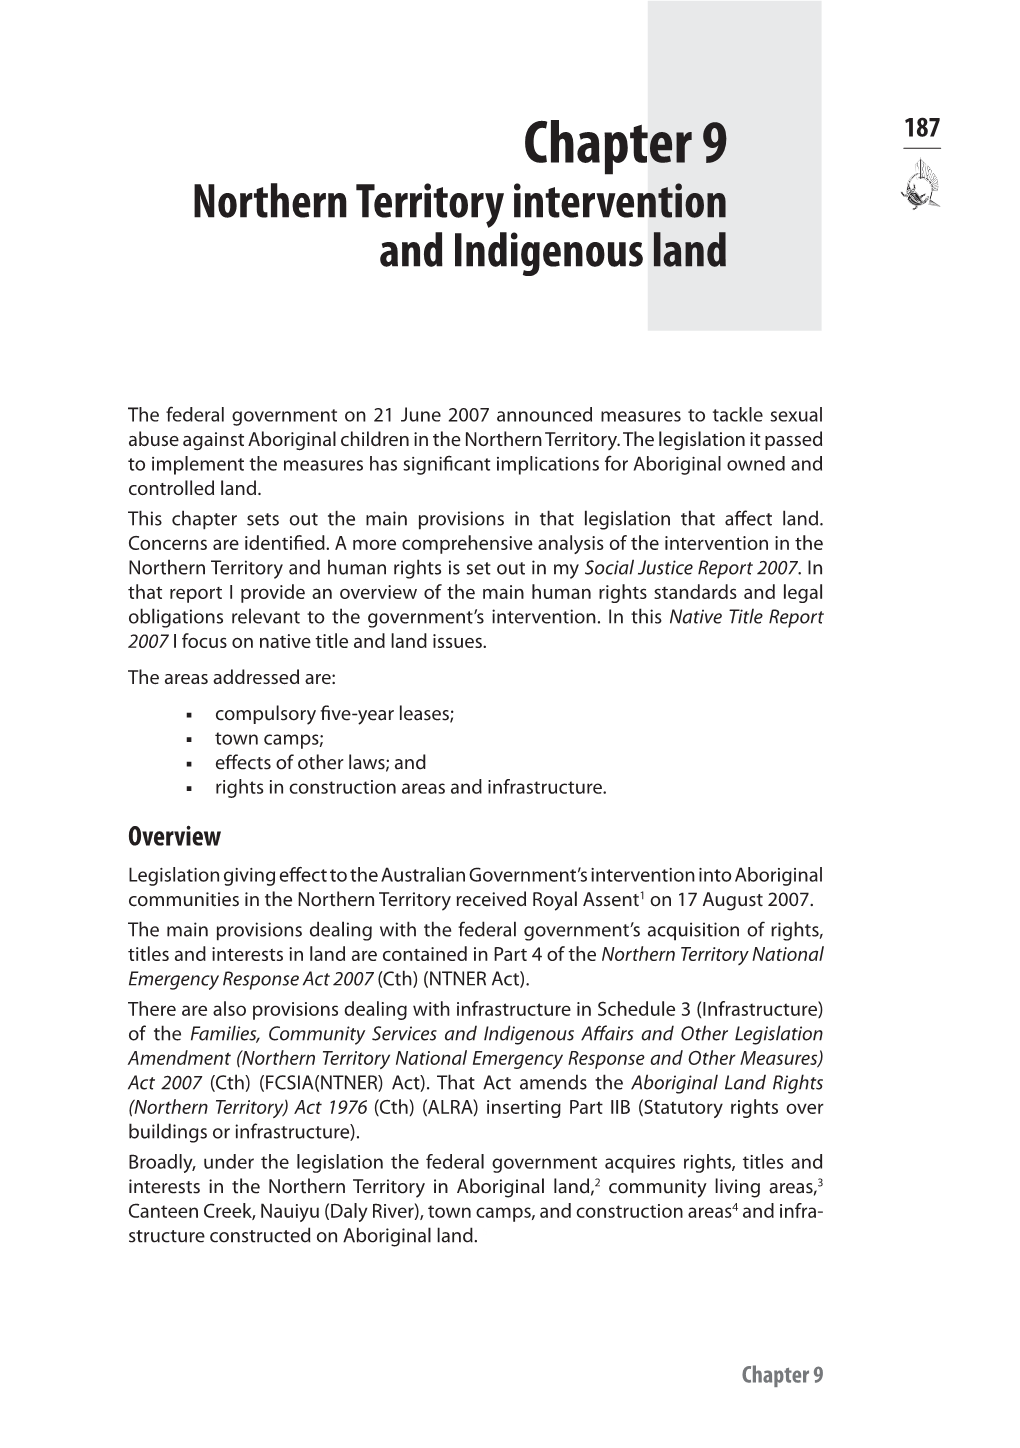 Chapter 9: Northern Territory Intervention and Indigenous Land